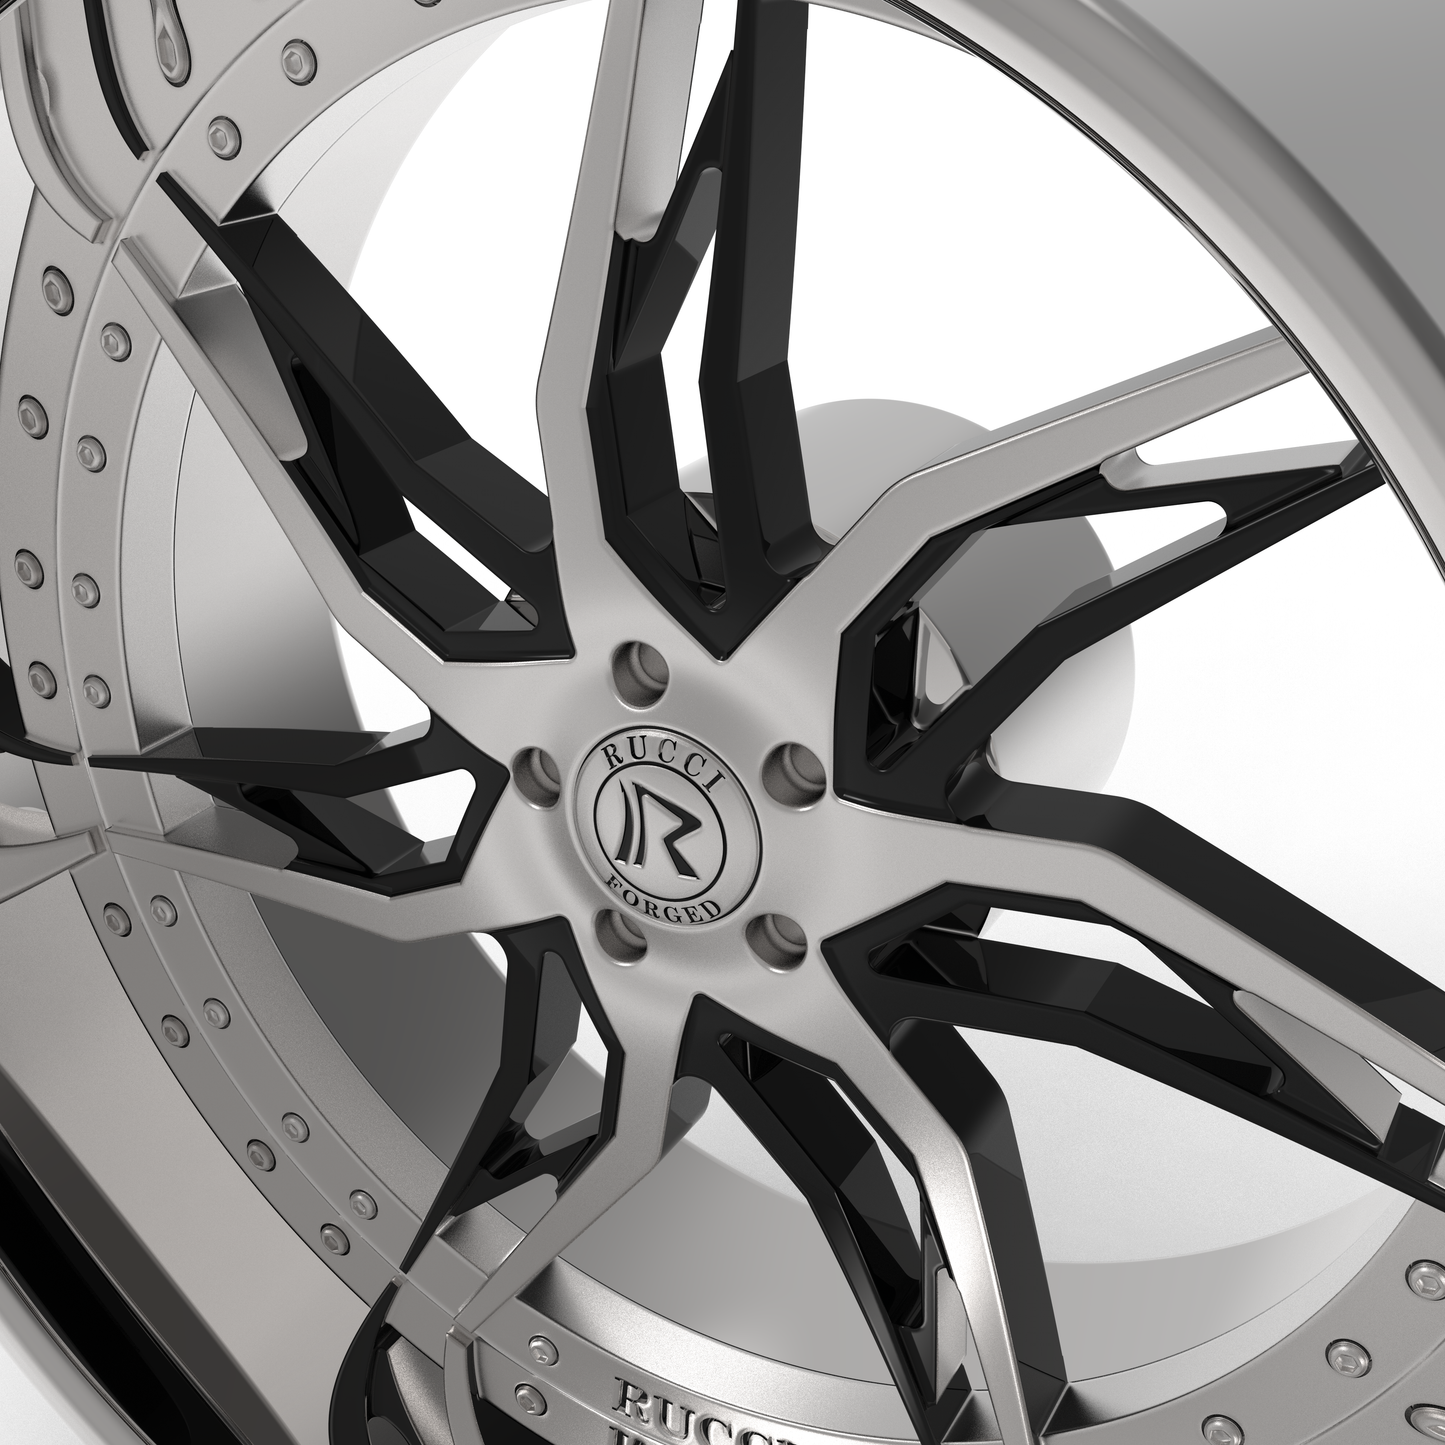 RUCCI FORGED COPO WHEEL 3D MODEL